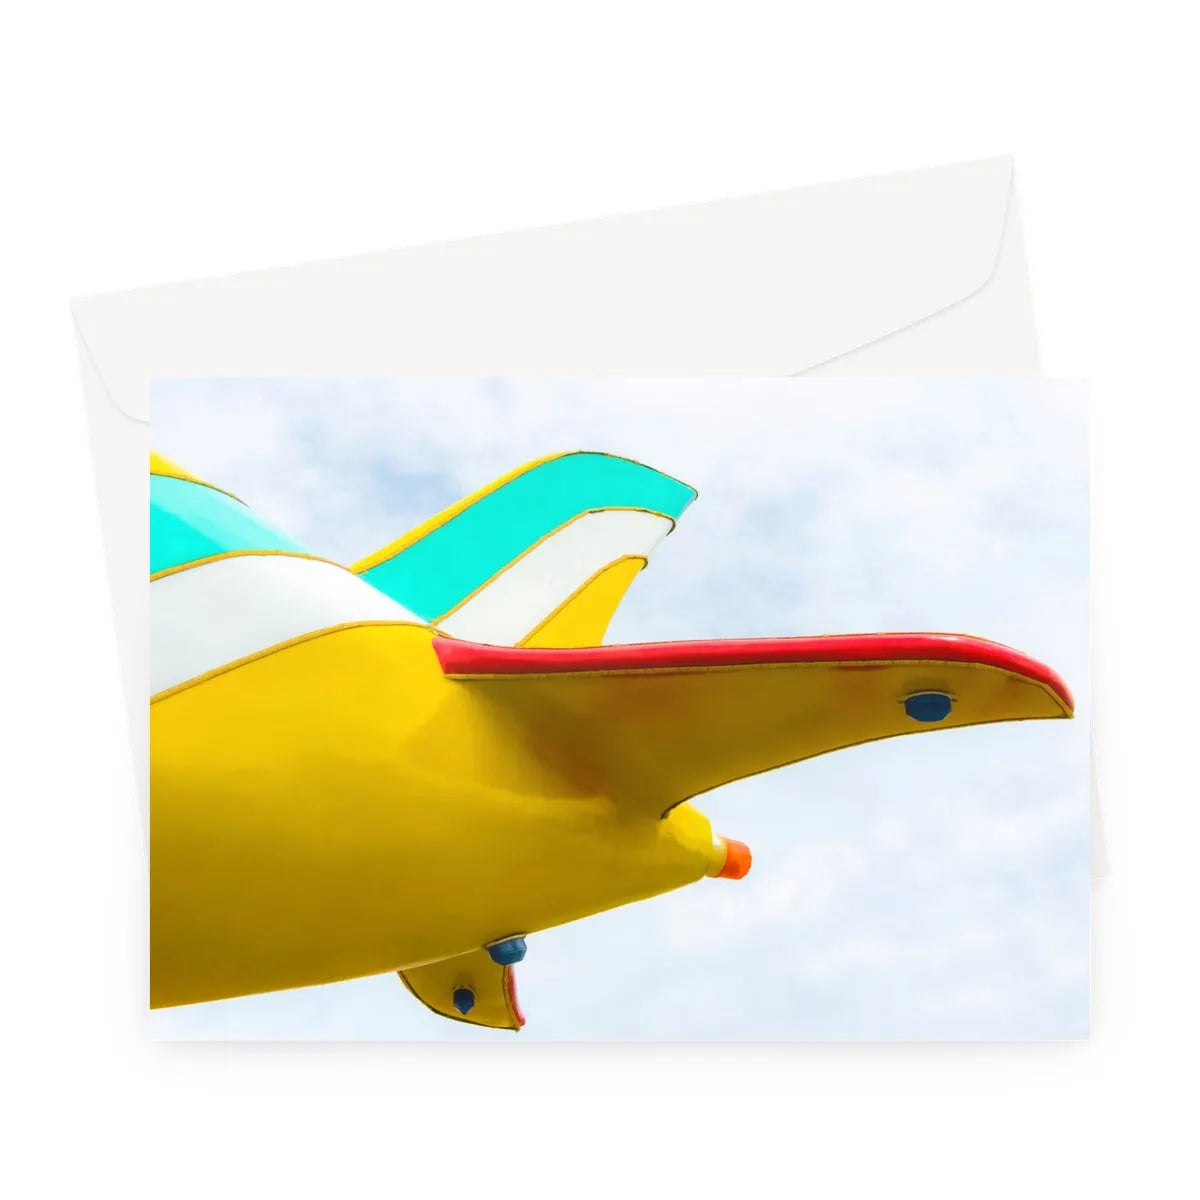 Flying High 2 Greeting Card - A5 Landscape / 1 Card - Greeting & Note Cards - Aesthetic Art